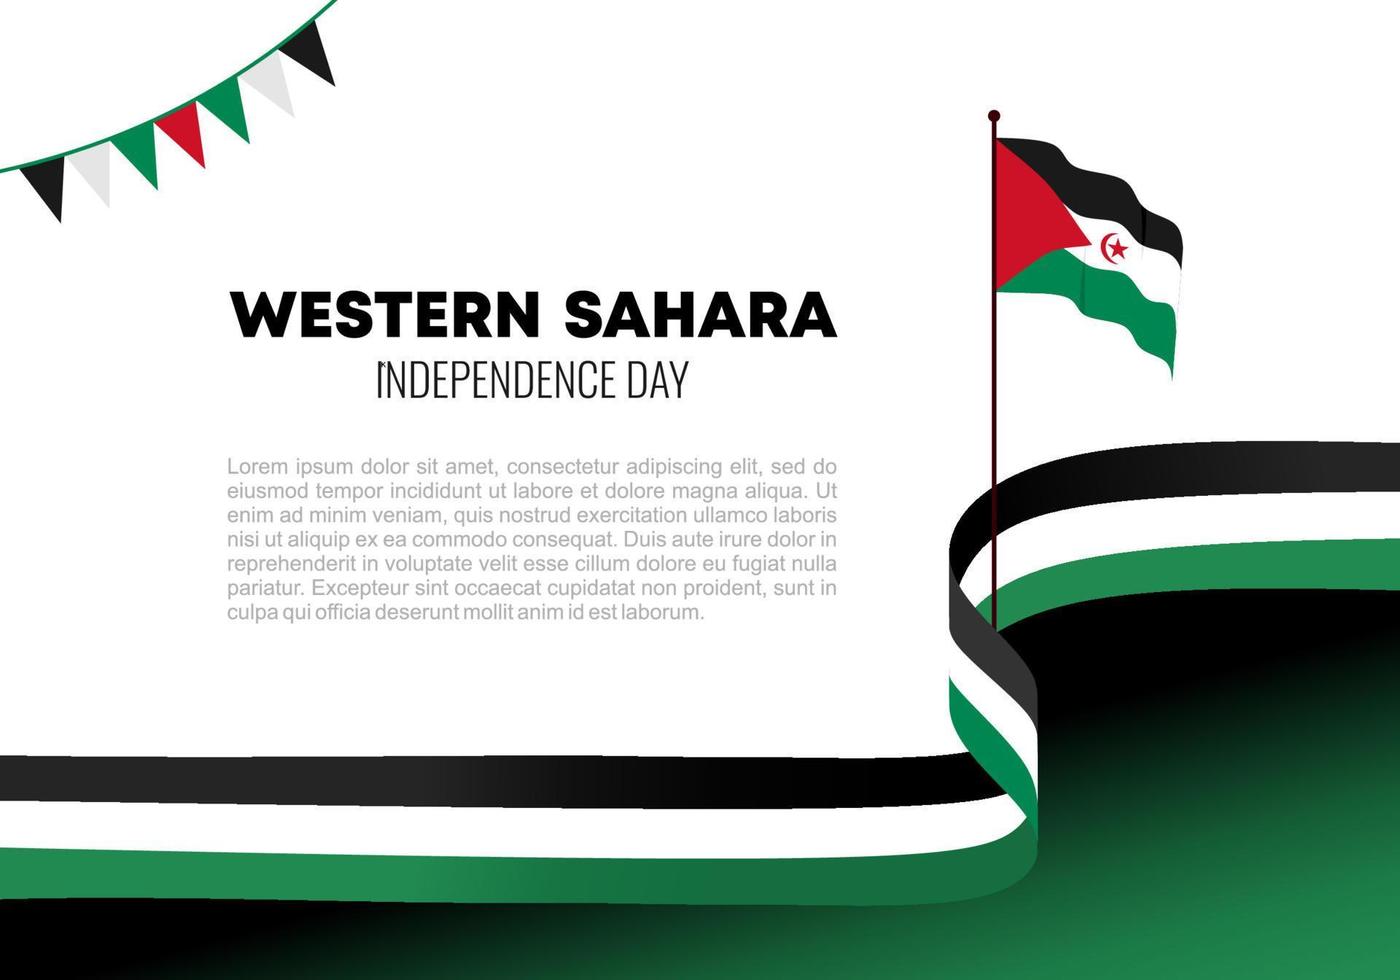 Western sahara independence day for national celebration february 27 vector